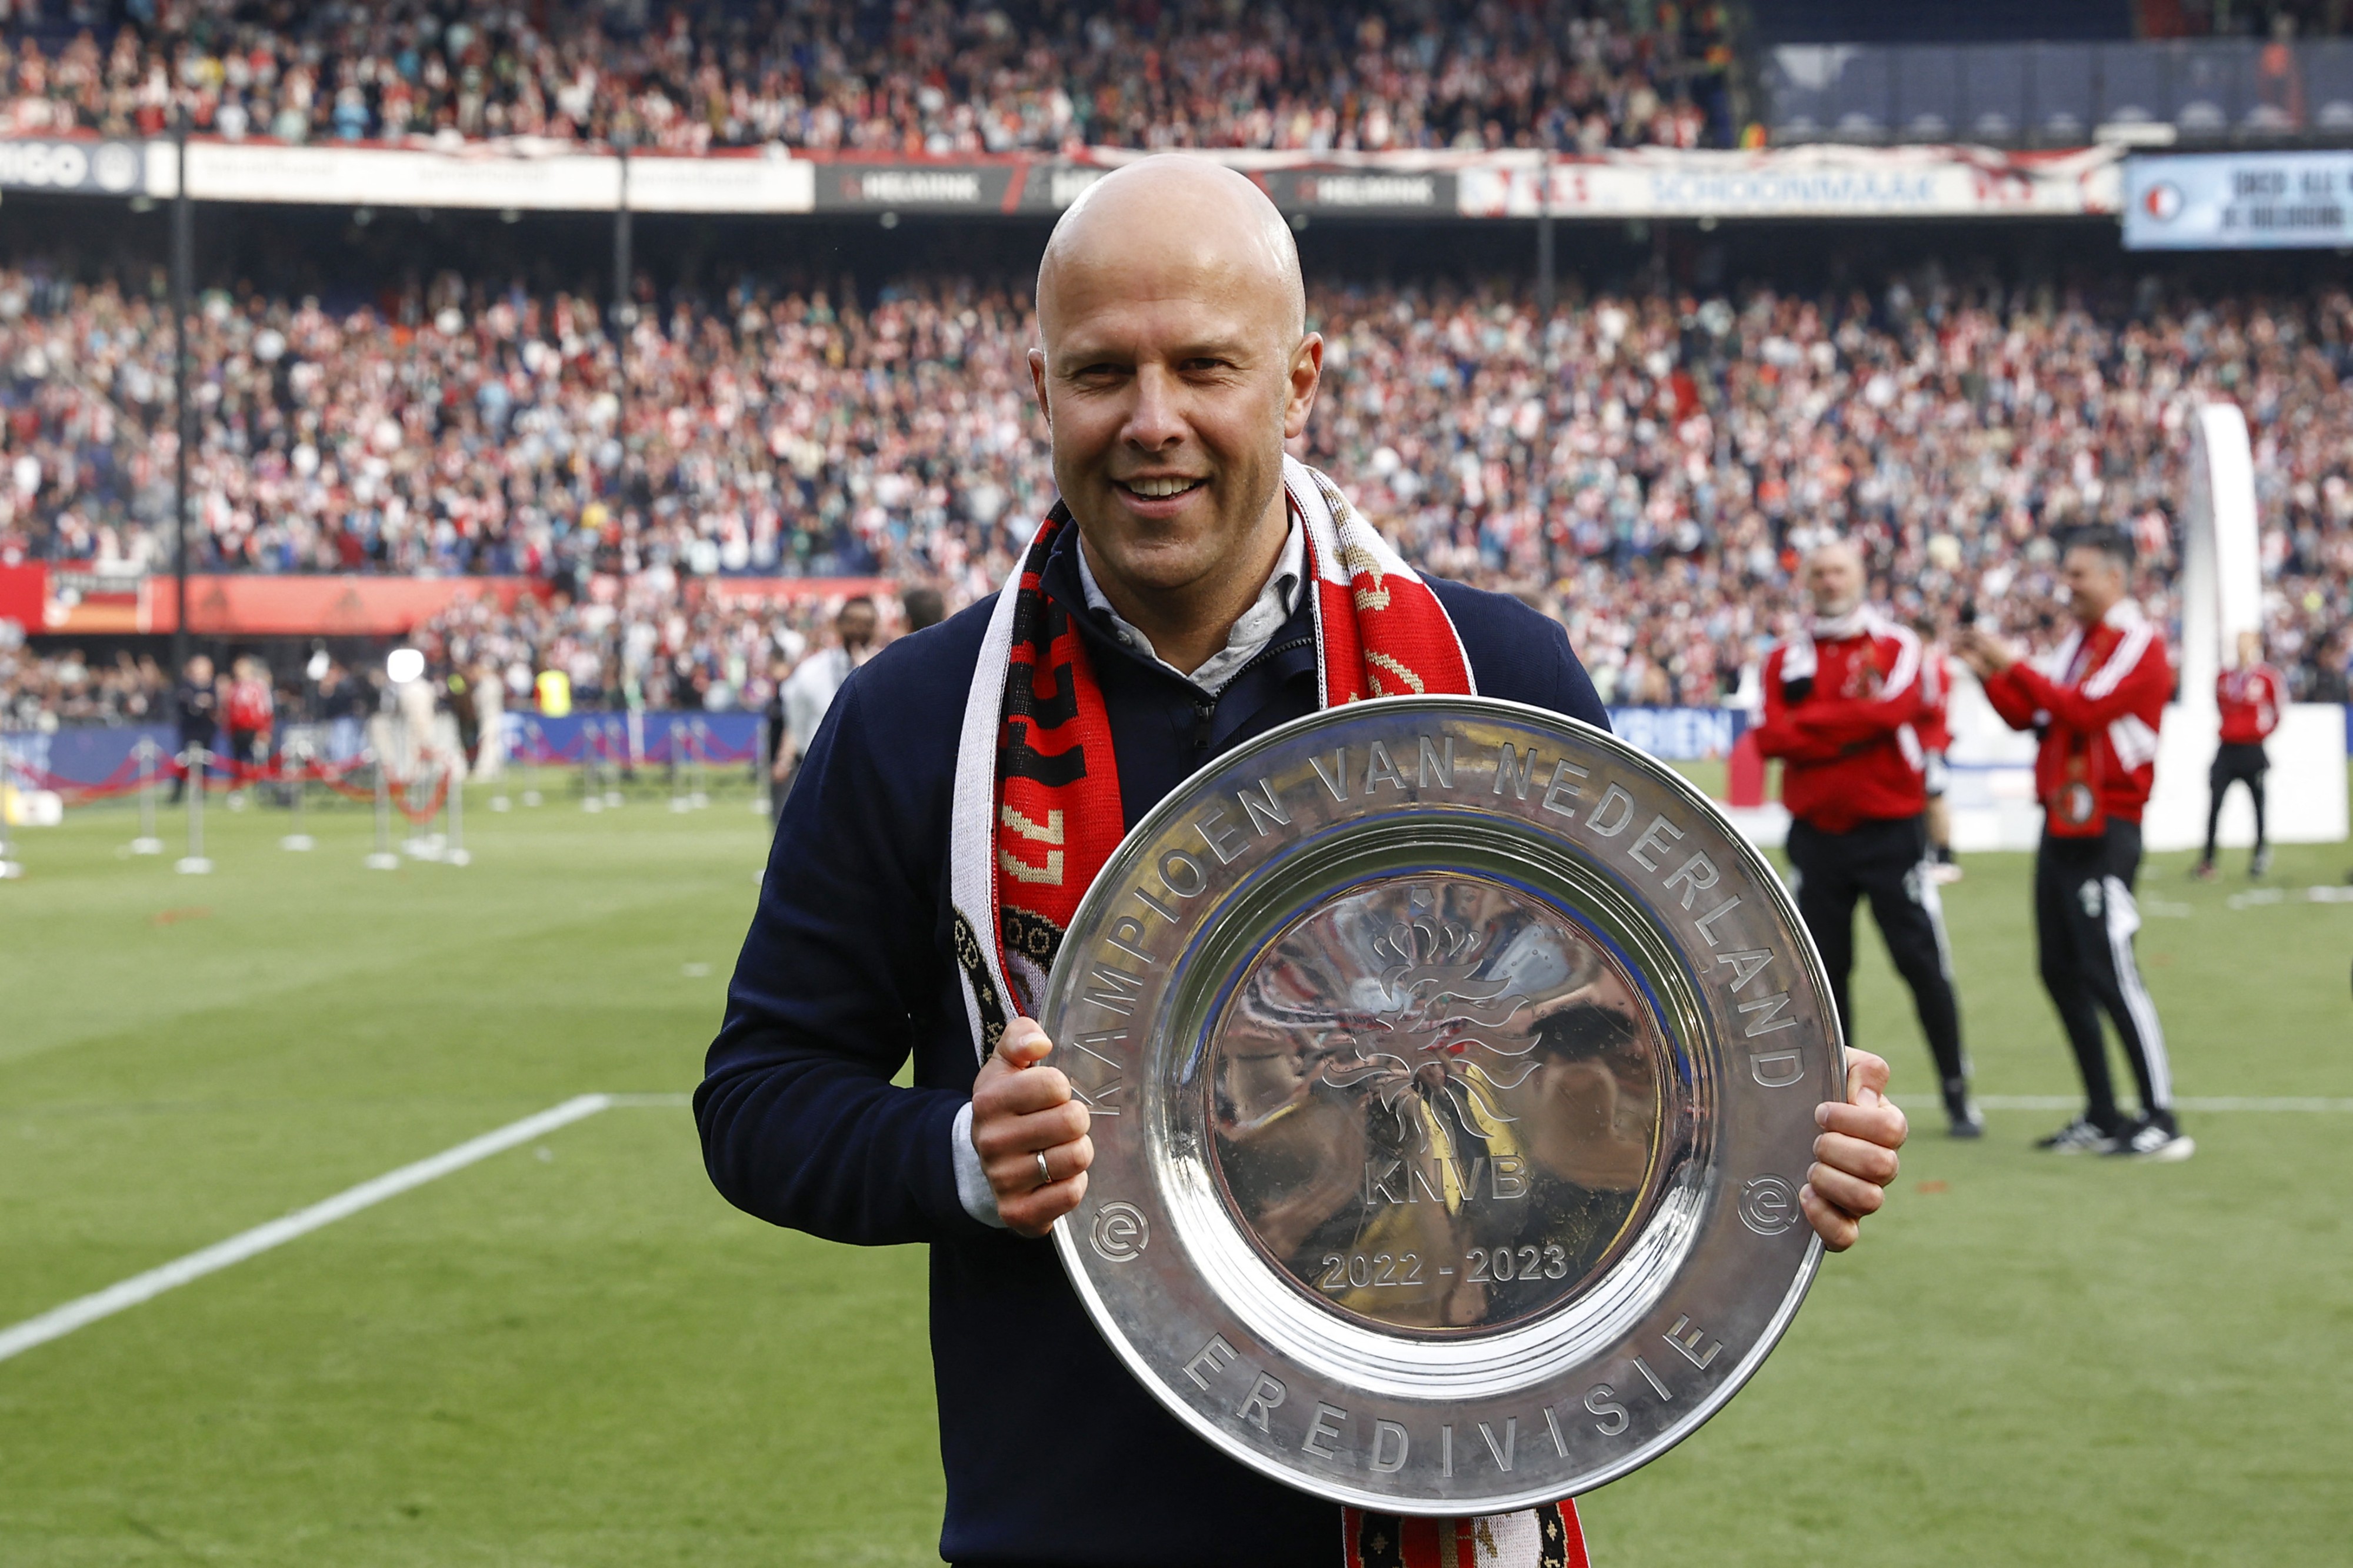 Feyenoord coach Arne Slot will take over at Liverpool